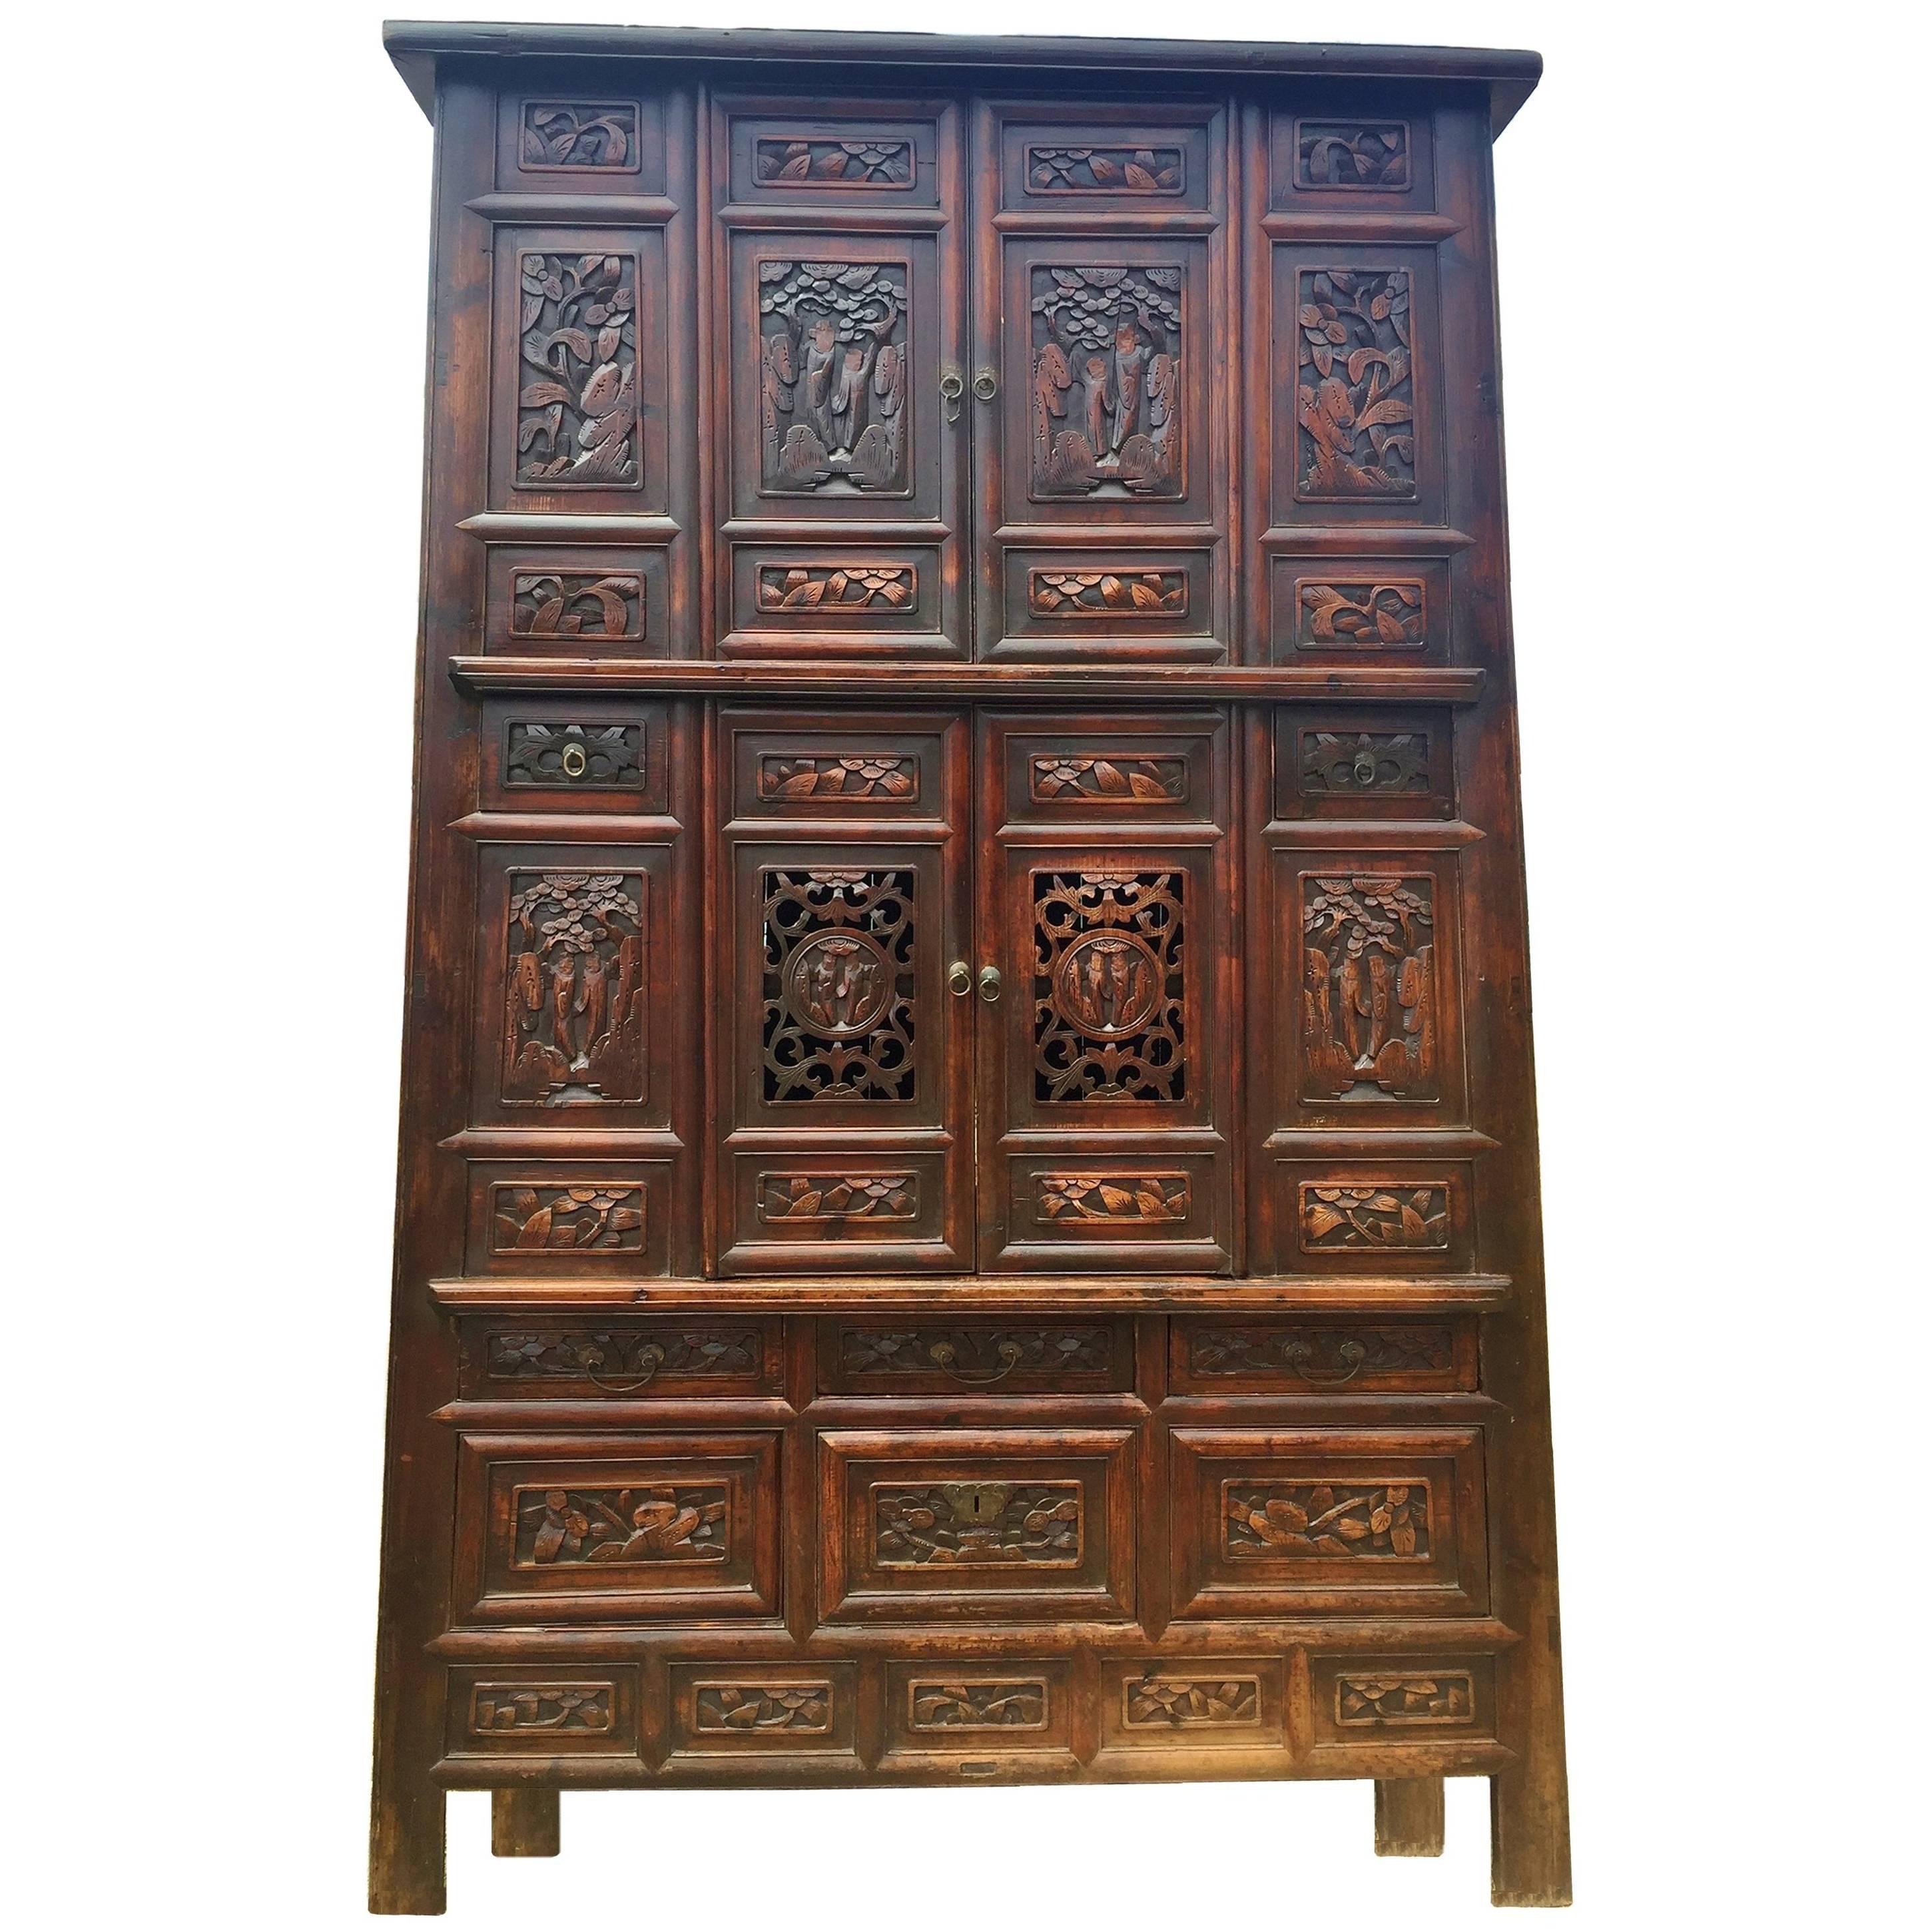 Monumental 8 Feet Tall Chinese Antique Cabinet Fully Carved